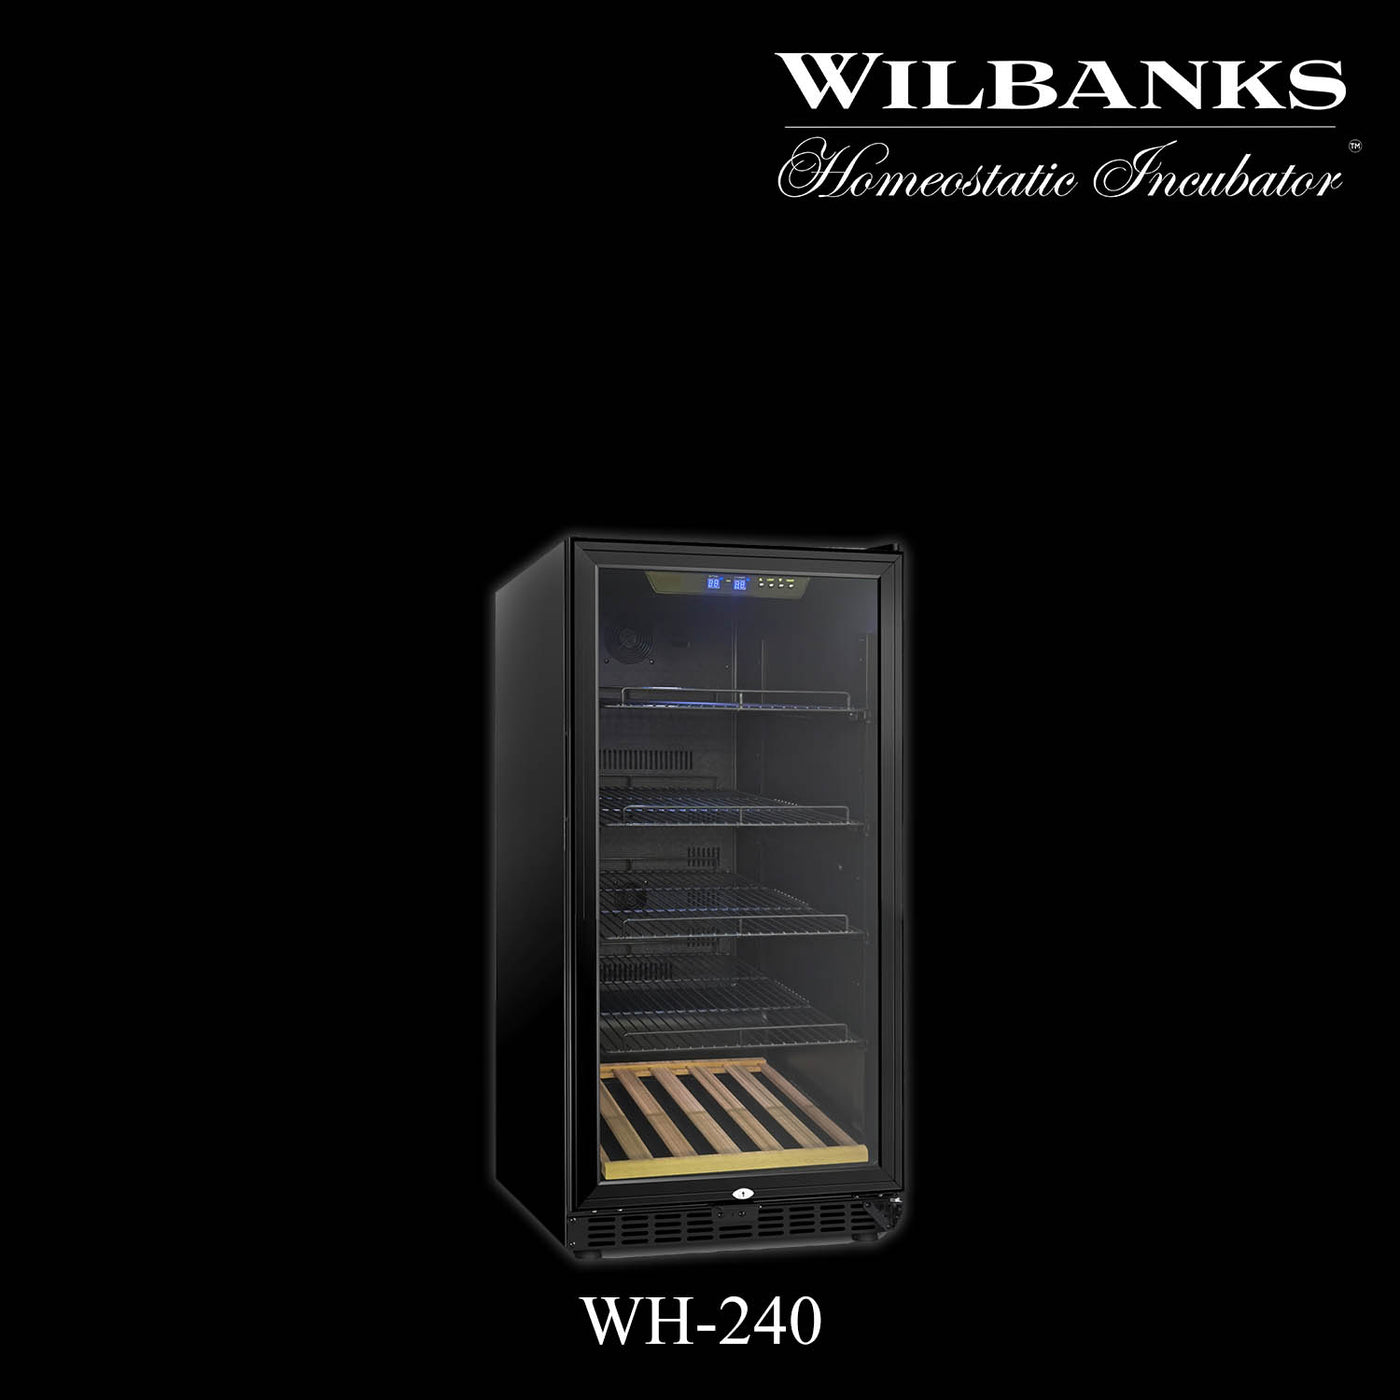 Wilbanks Homeostatic Incubator™  WH-240 (Capacity - 16 Ball Python Clutches*)